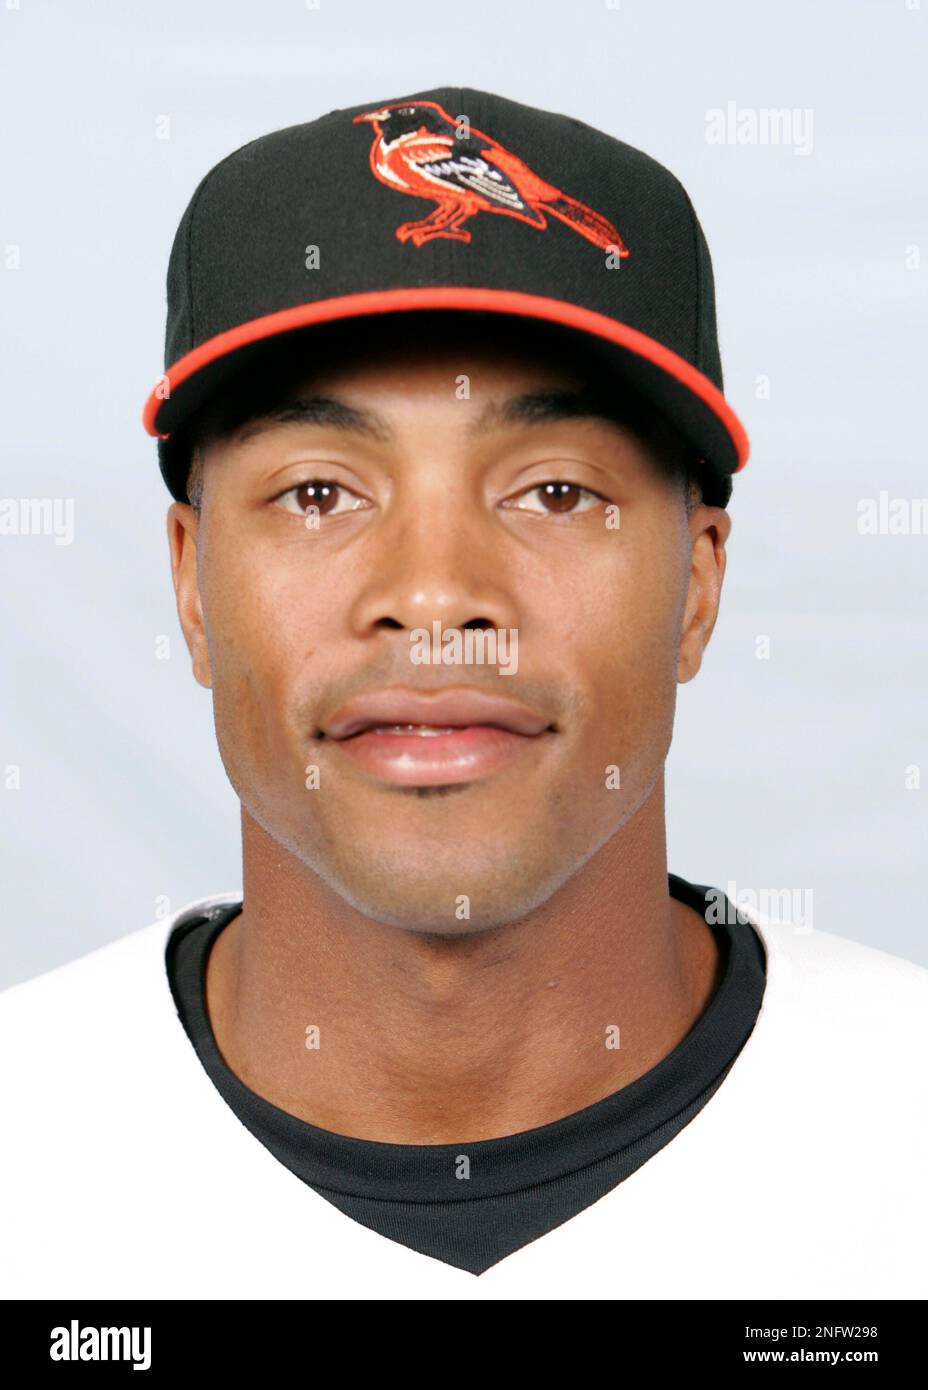 This is a 2008 file photo of Chris Roberson of the Baltimore Orioles  baseball team. This image reflects the Orioles active roster as of Monday,  Feb. 25, 2008 when this photo was